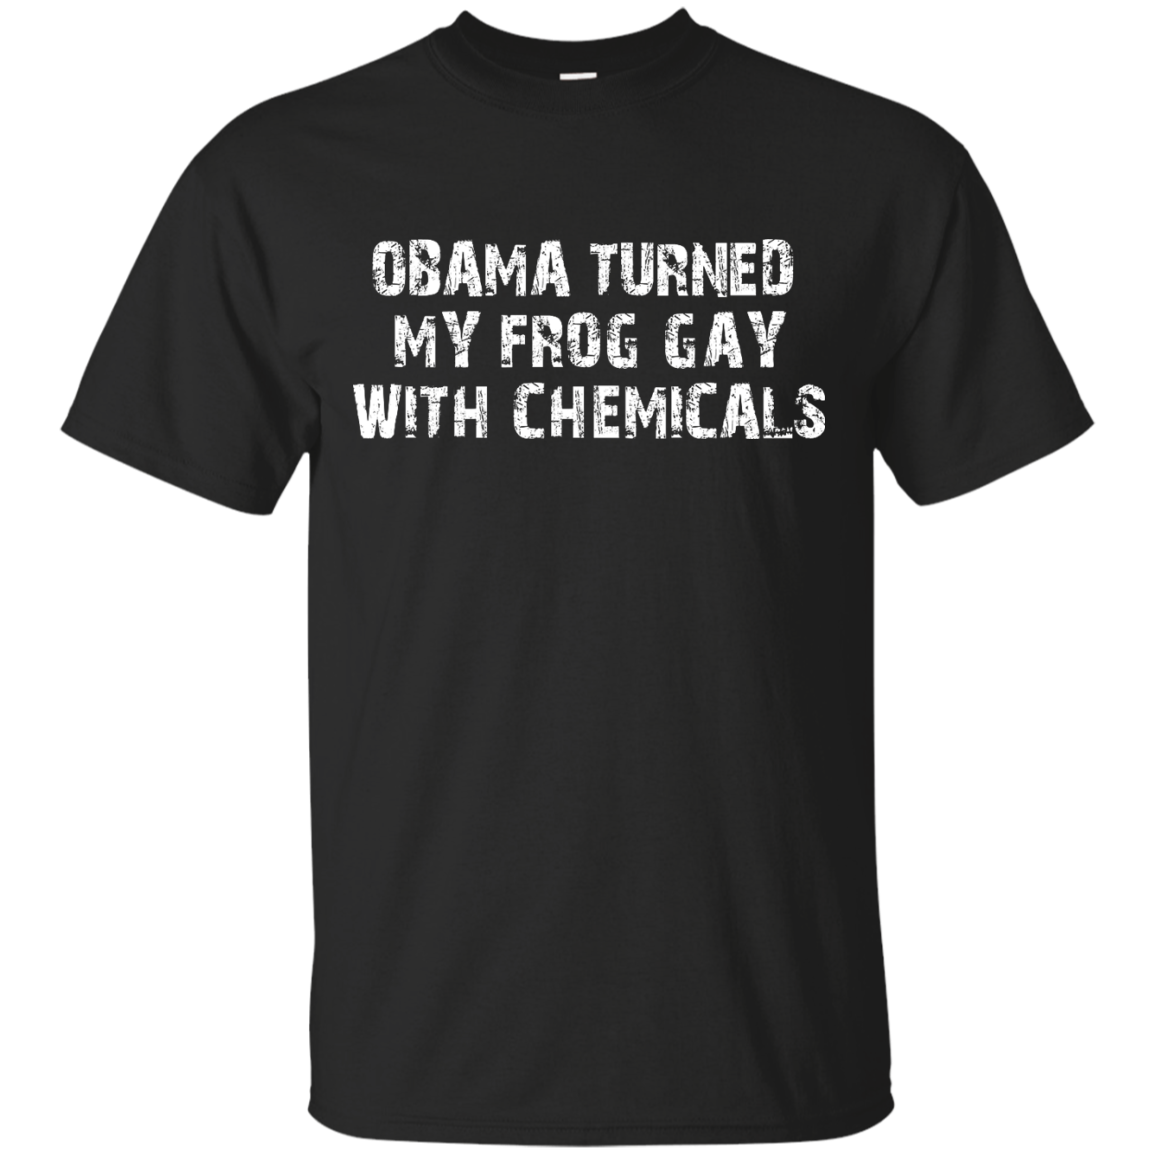 Obama turned my frog gay with chemicals shirt, hoodie, tank